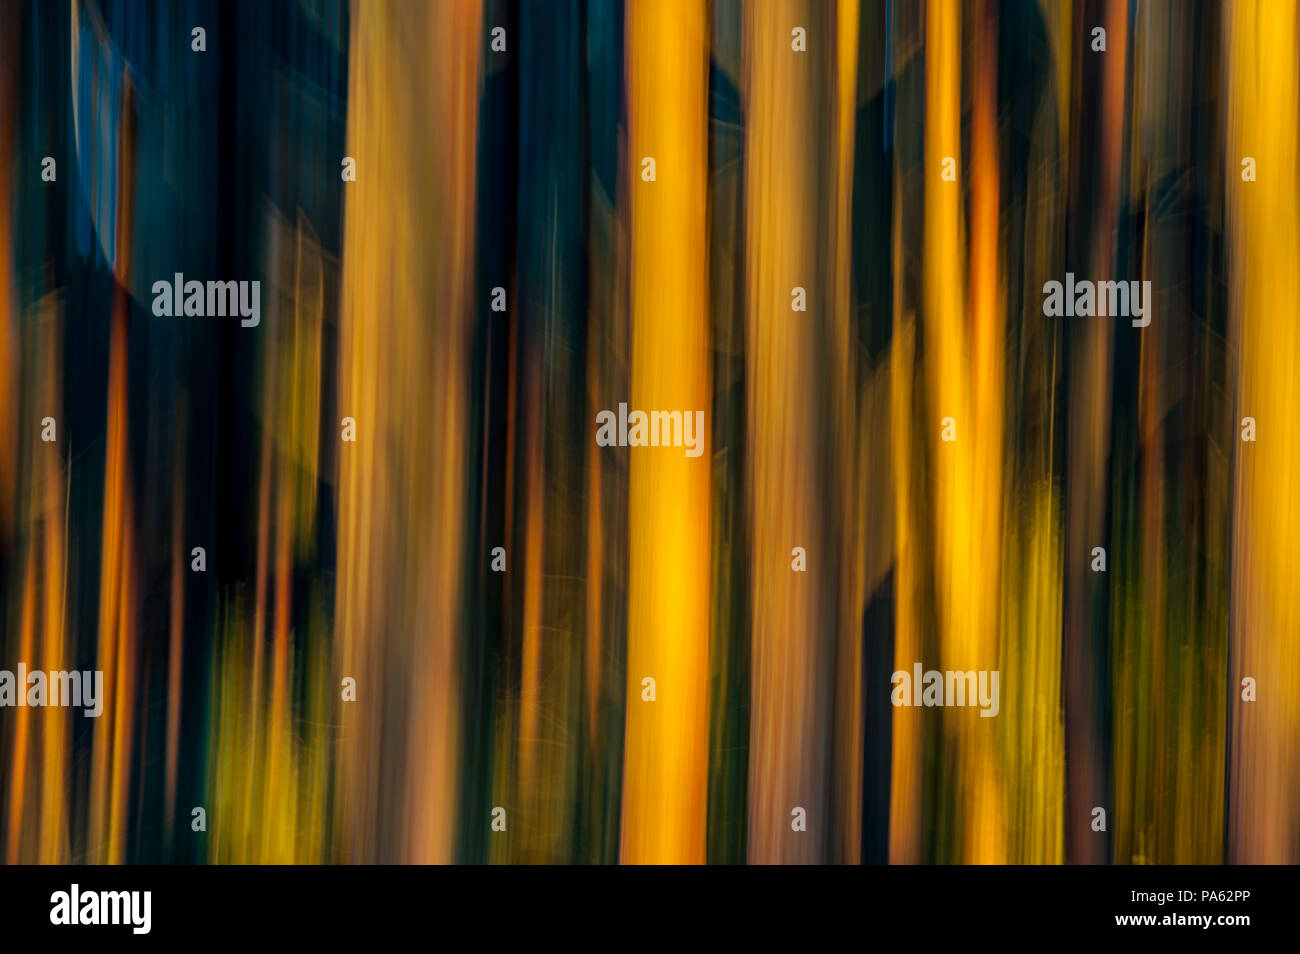 22-01-15 Tyninghame Woods, North Berwick, East Lothian, Scotland, UK. Blurry, abstract trees. Photo taken with slow shutter speed and movement. Photo: Stock Photo